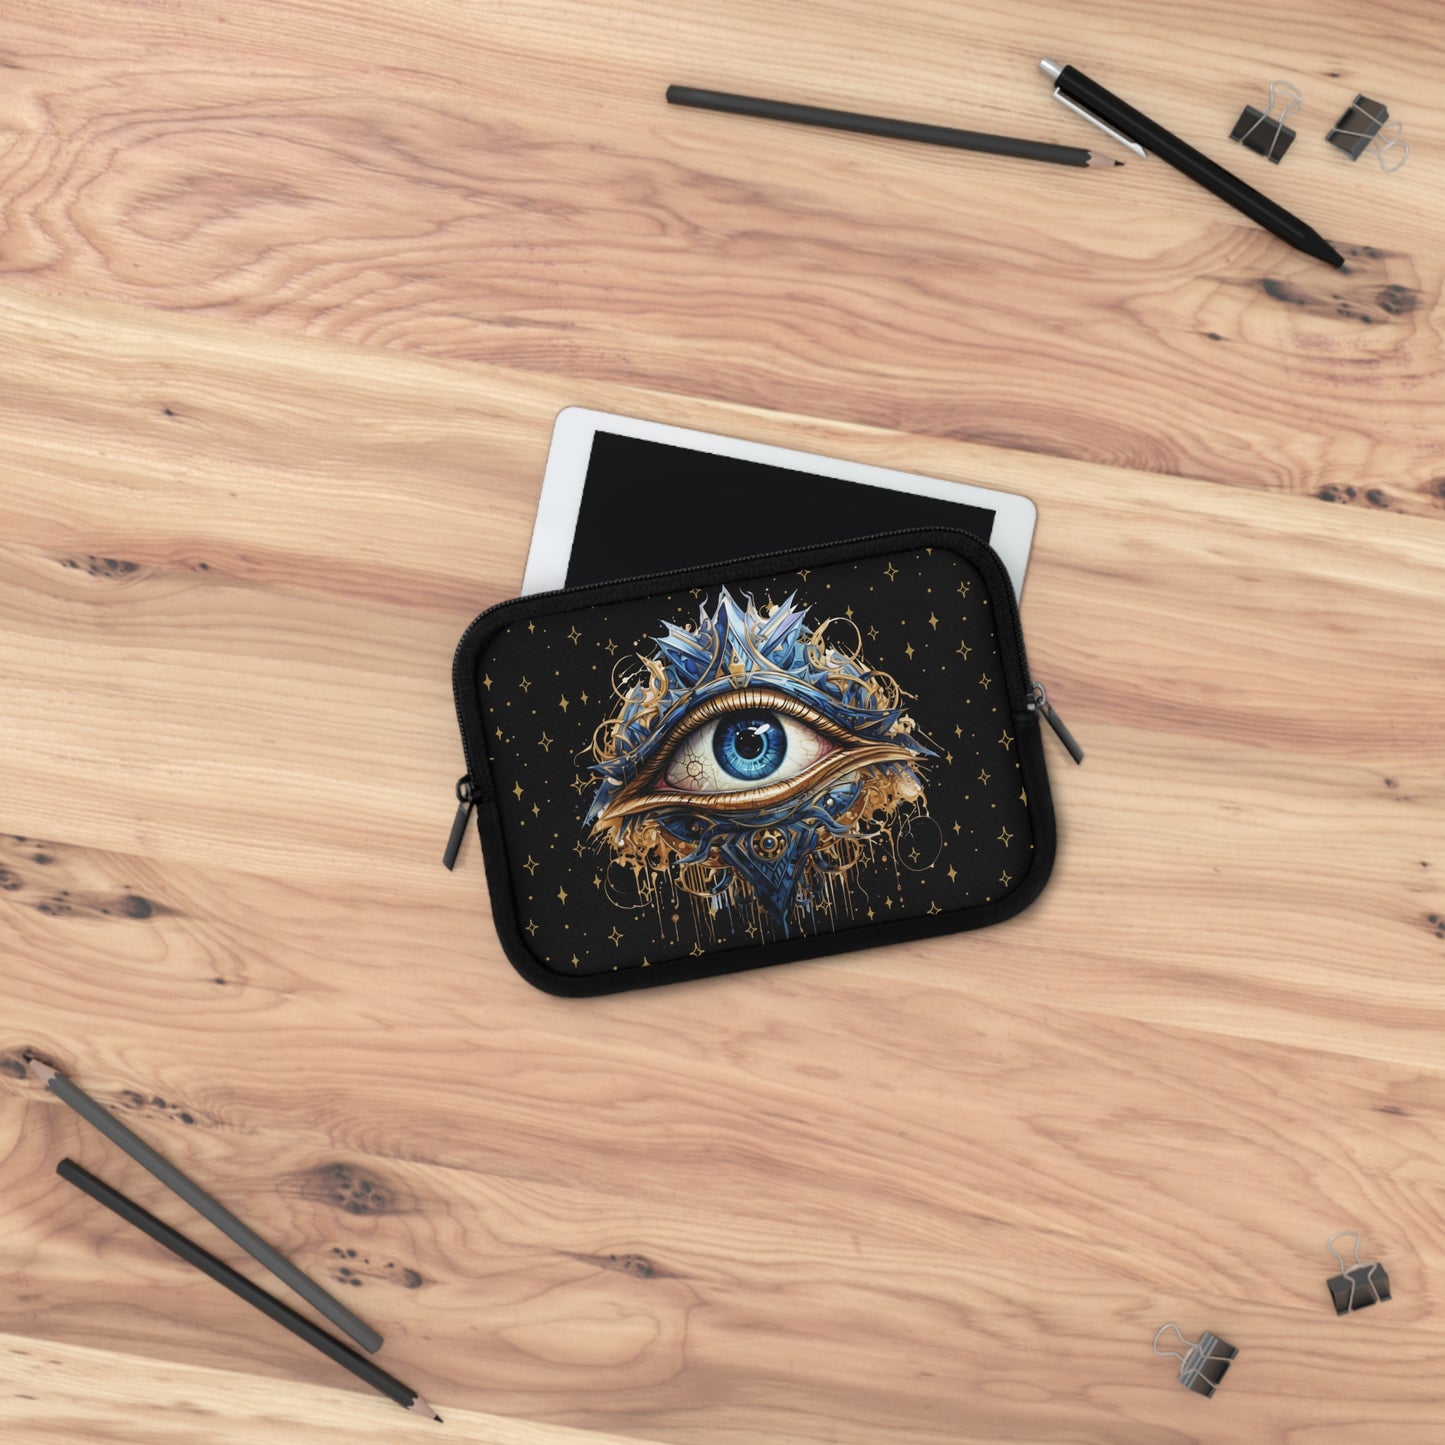 Psychic Eye Laptop Case, laptop sleeve, Pagan Wiccan ipad tablet padded cover travel case